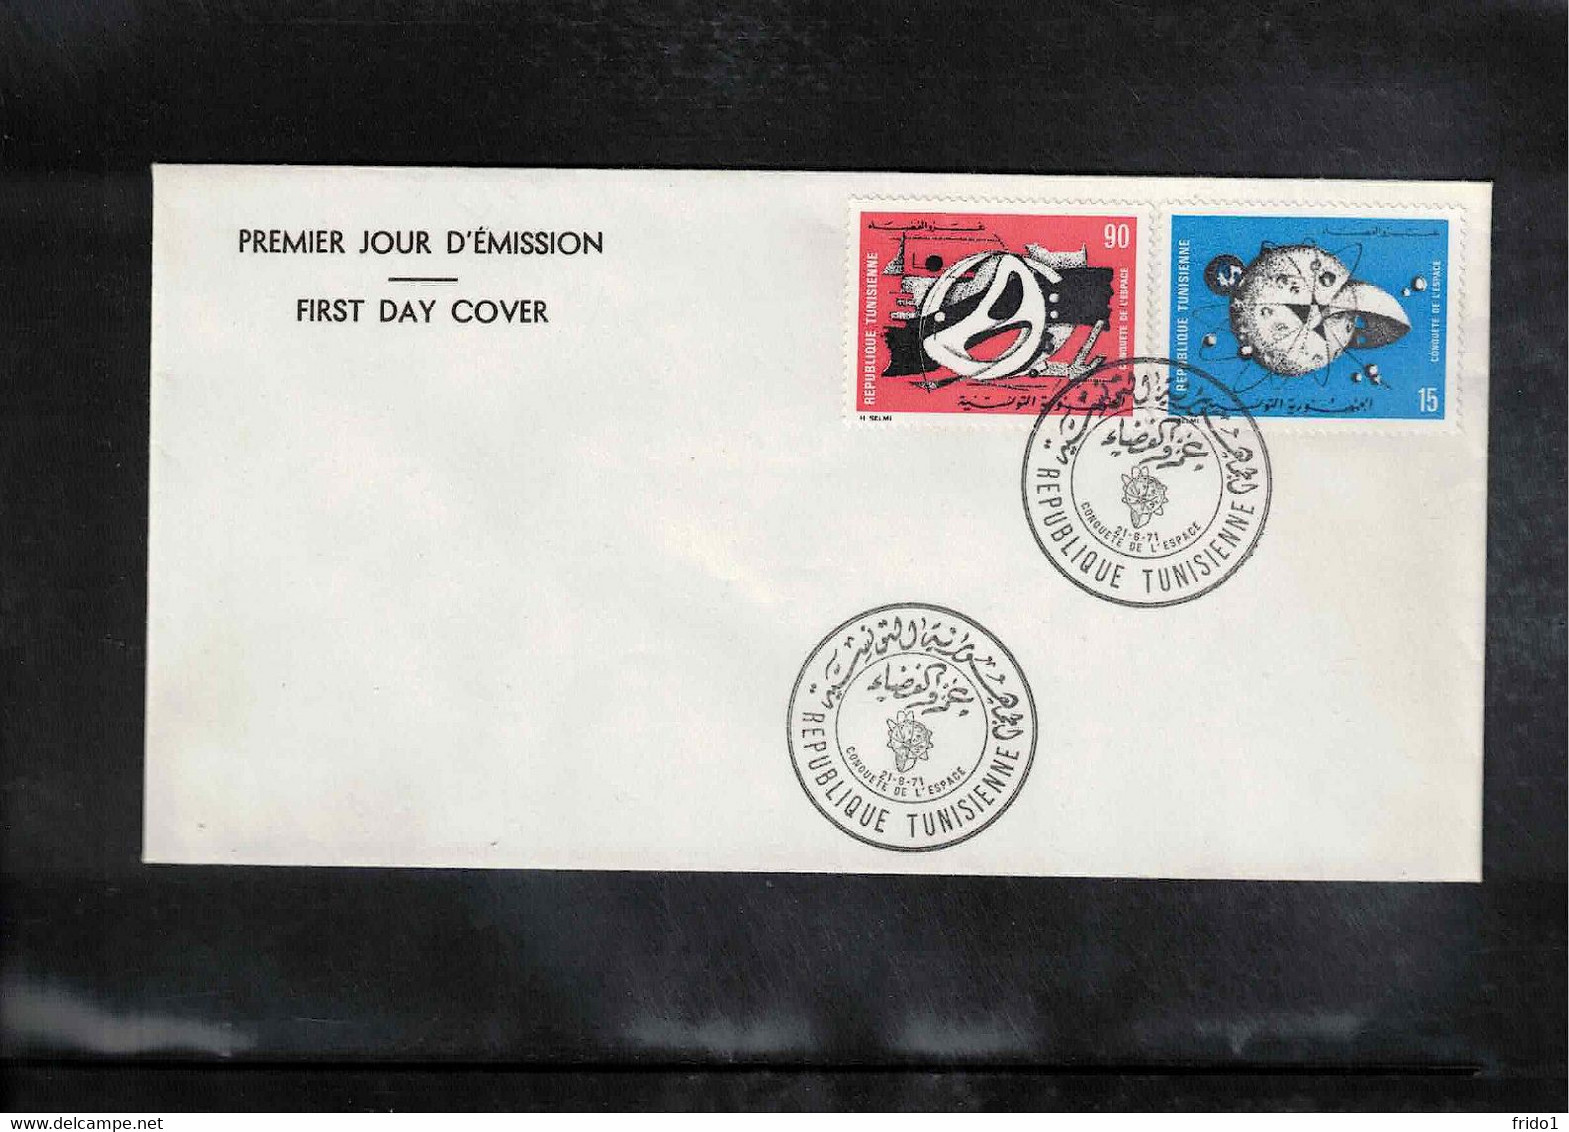 Tunisia / Tunisie 1971 Space / Raumfahrt Conquest Of Space FDC - Afrika